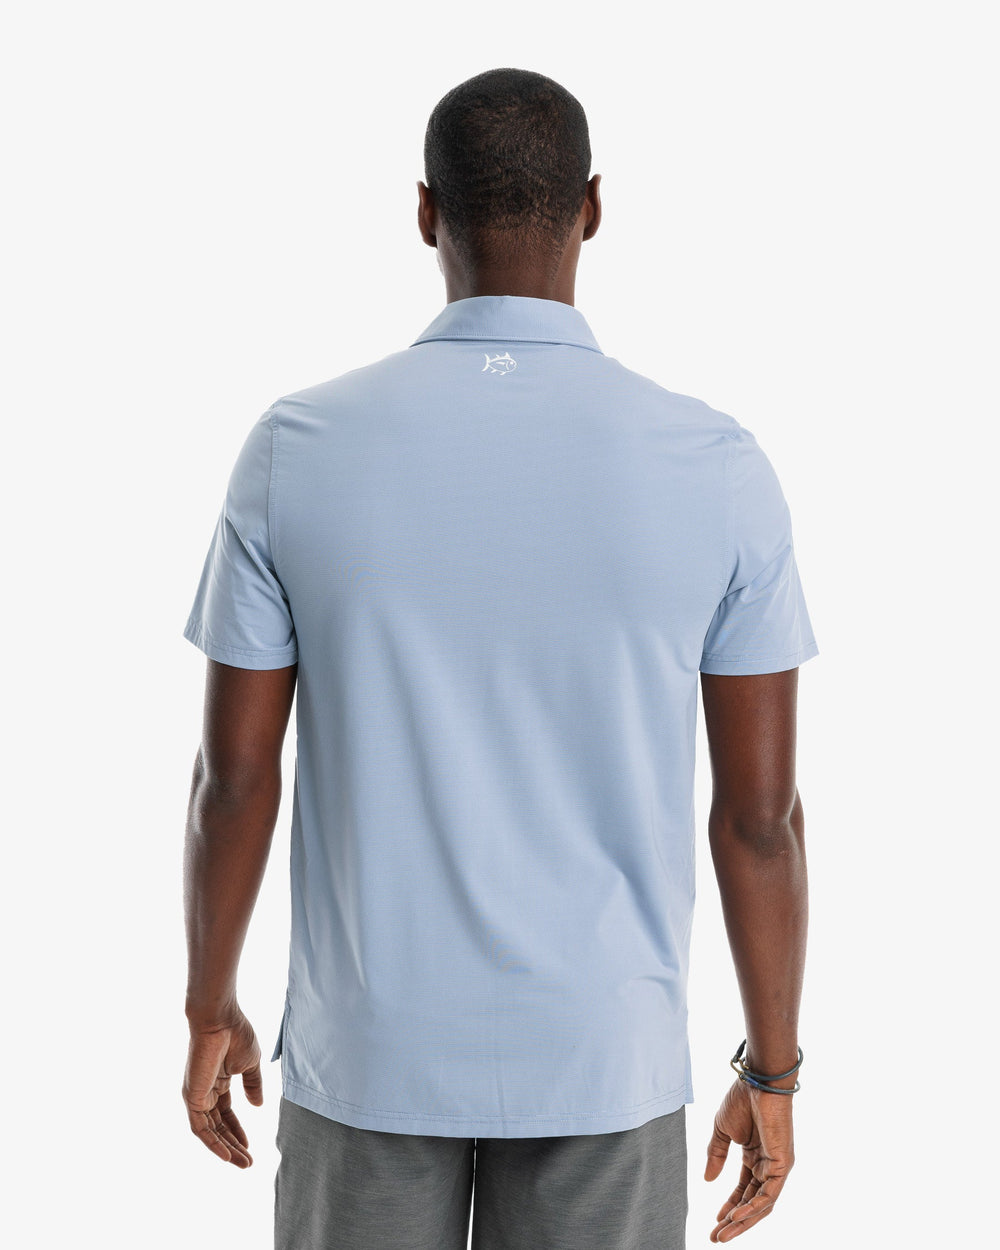 The model back view of the Men's Sawgrass Stripe brrr°®-eeze Performance Polo Shirt by Southern Tide - Blue Ridge